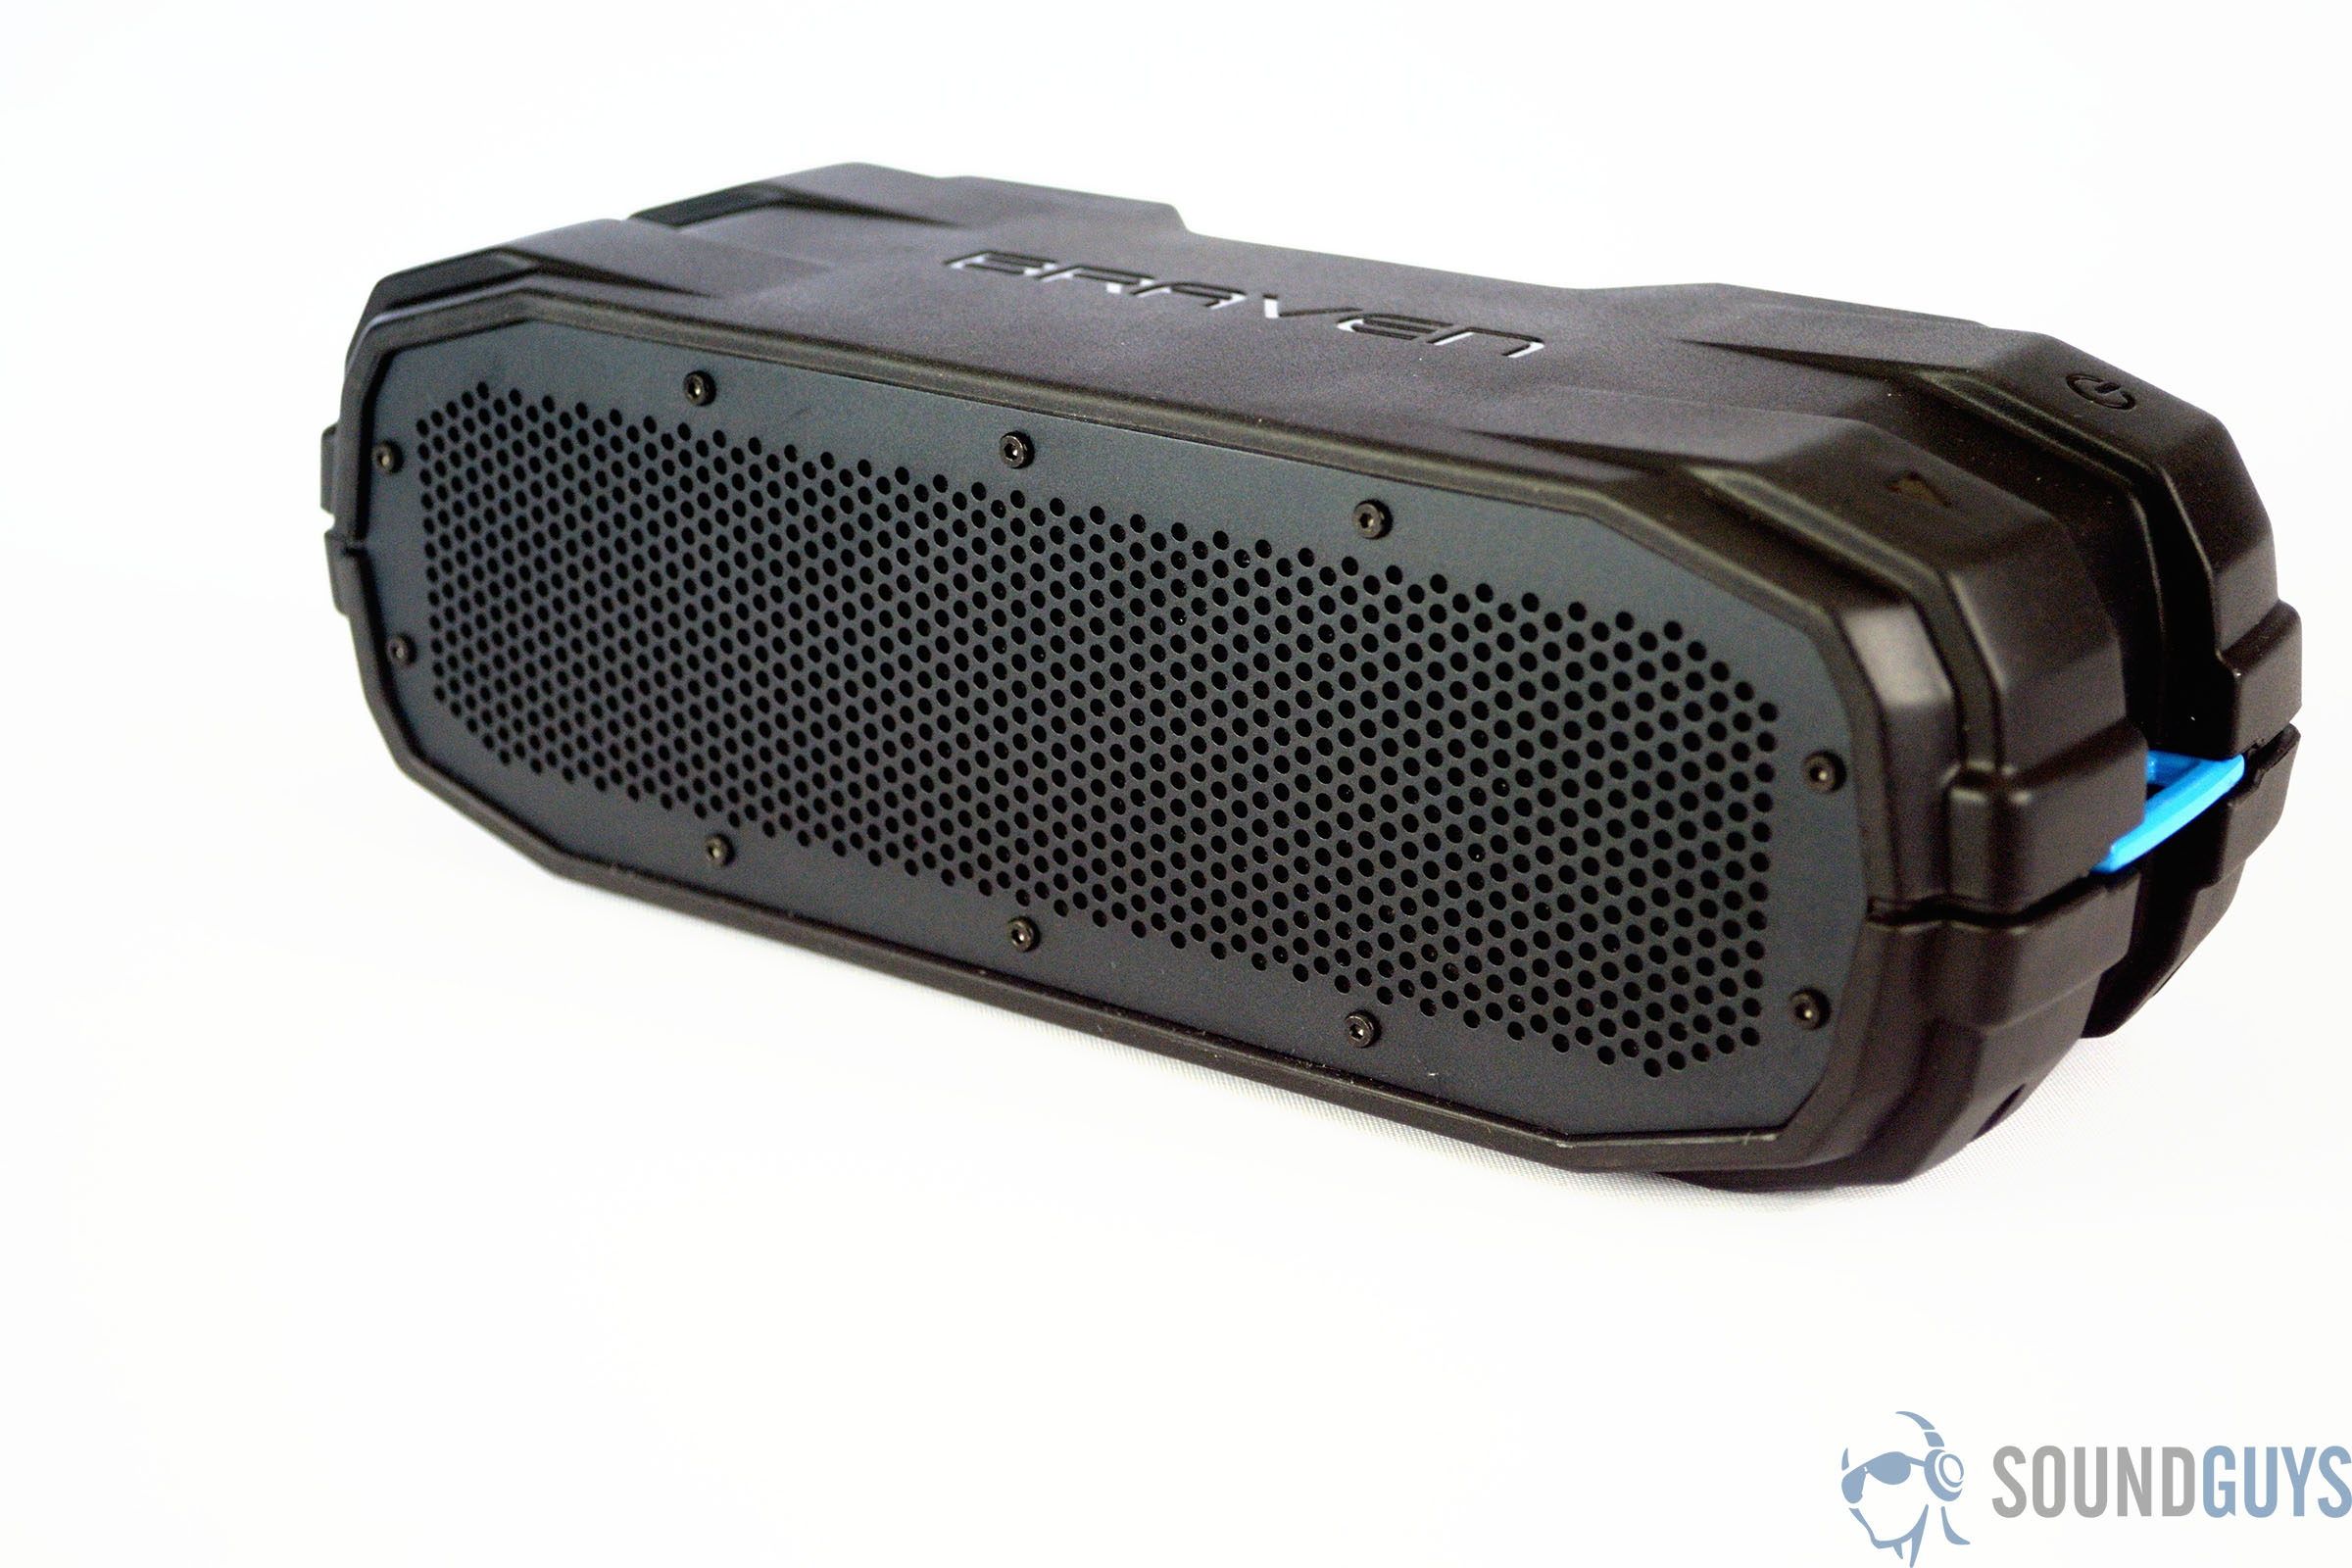 Braven BRV-X Ultra-rugged Outdoor Portable Speaker/Charger Price